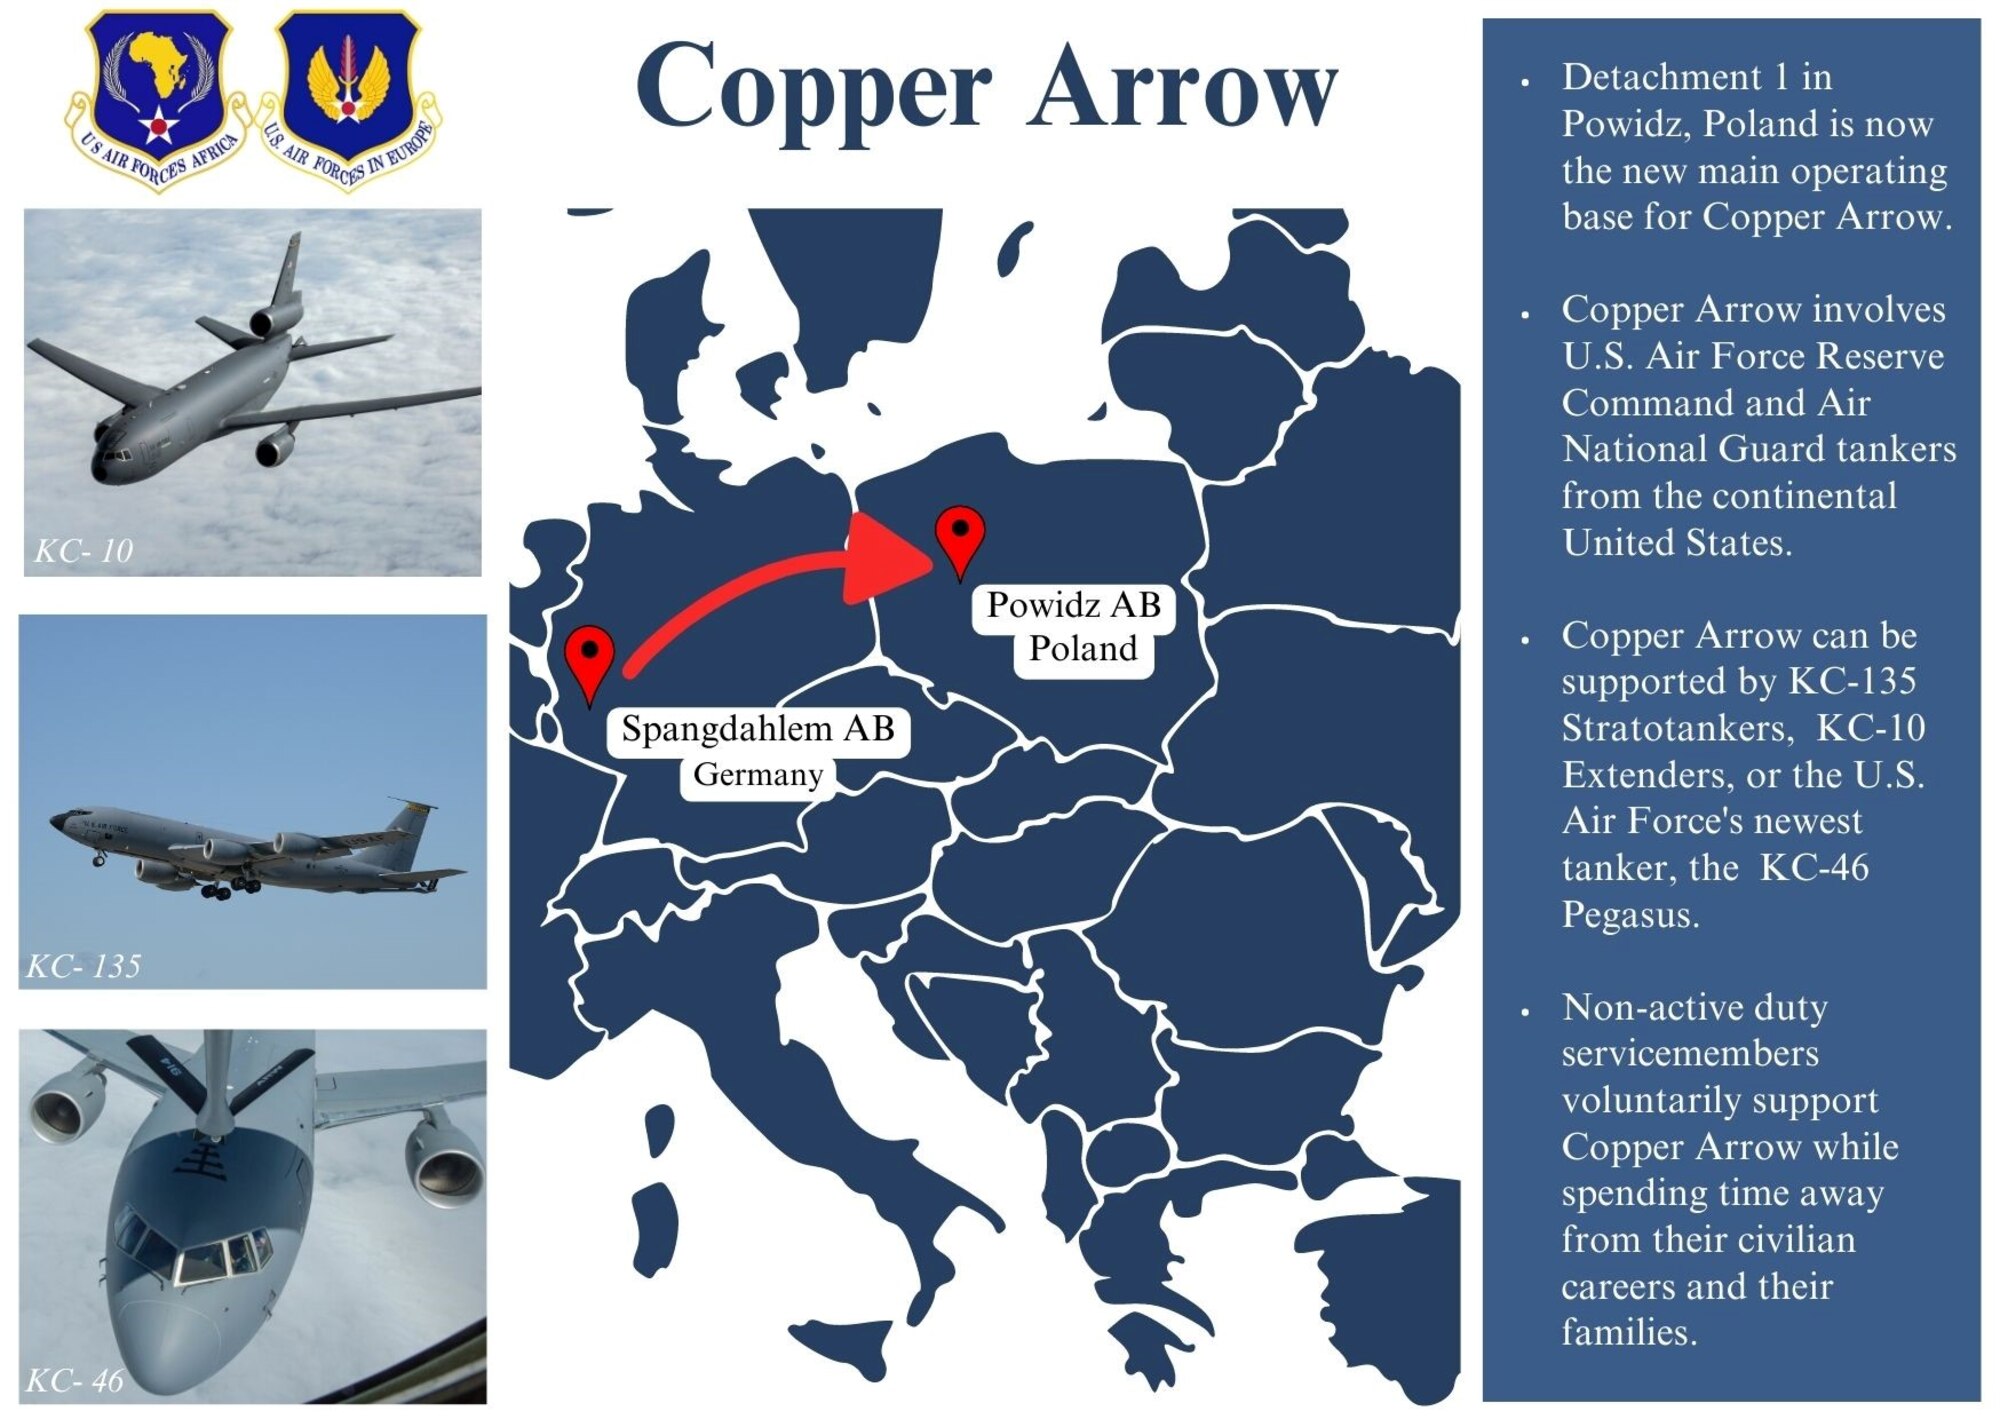 Copper Arrow brings together U.S. Air Force Reserve tanker aircraft units from the continental U.S. to train, exercise and operate with Allies   and partners in support of the European Deterrence Initiative. Each year, units from across the U.S. voluntarily send their tanker aircrafts and operational assets to Europe to support USAFE operations.